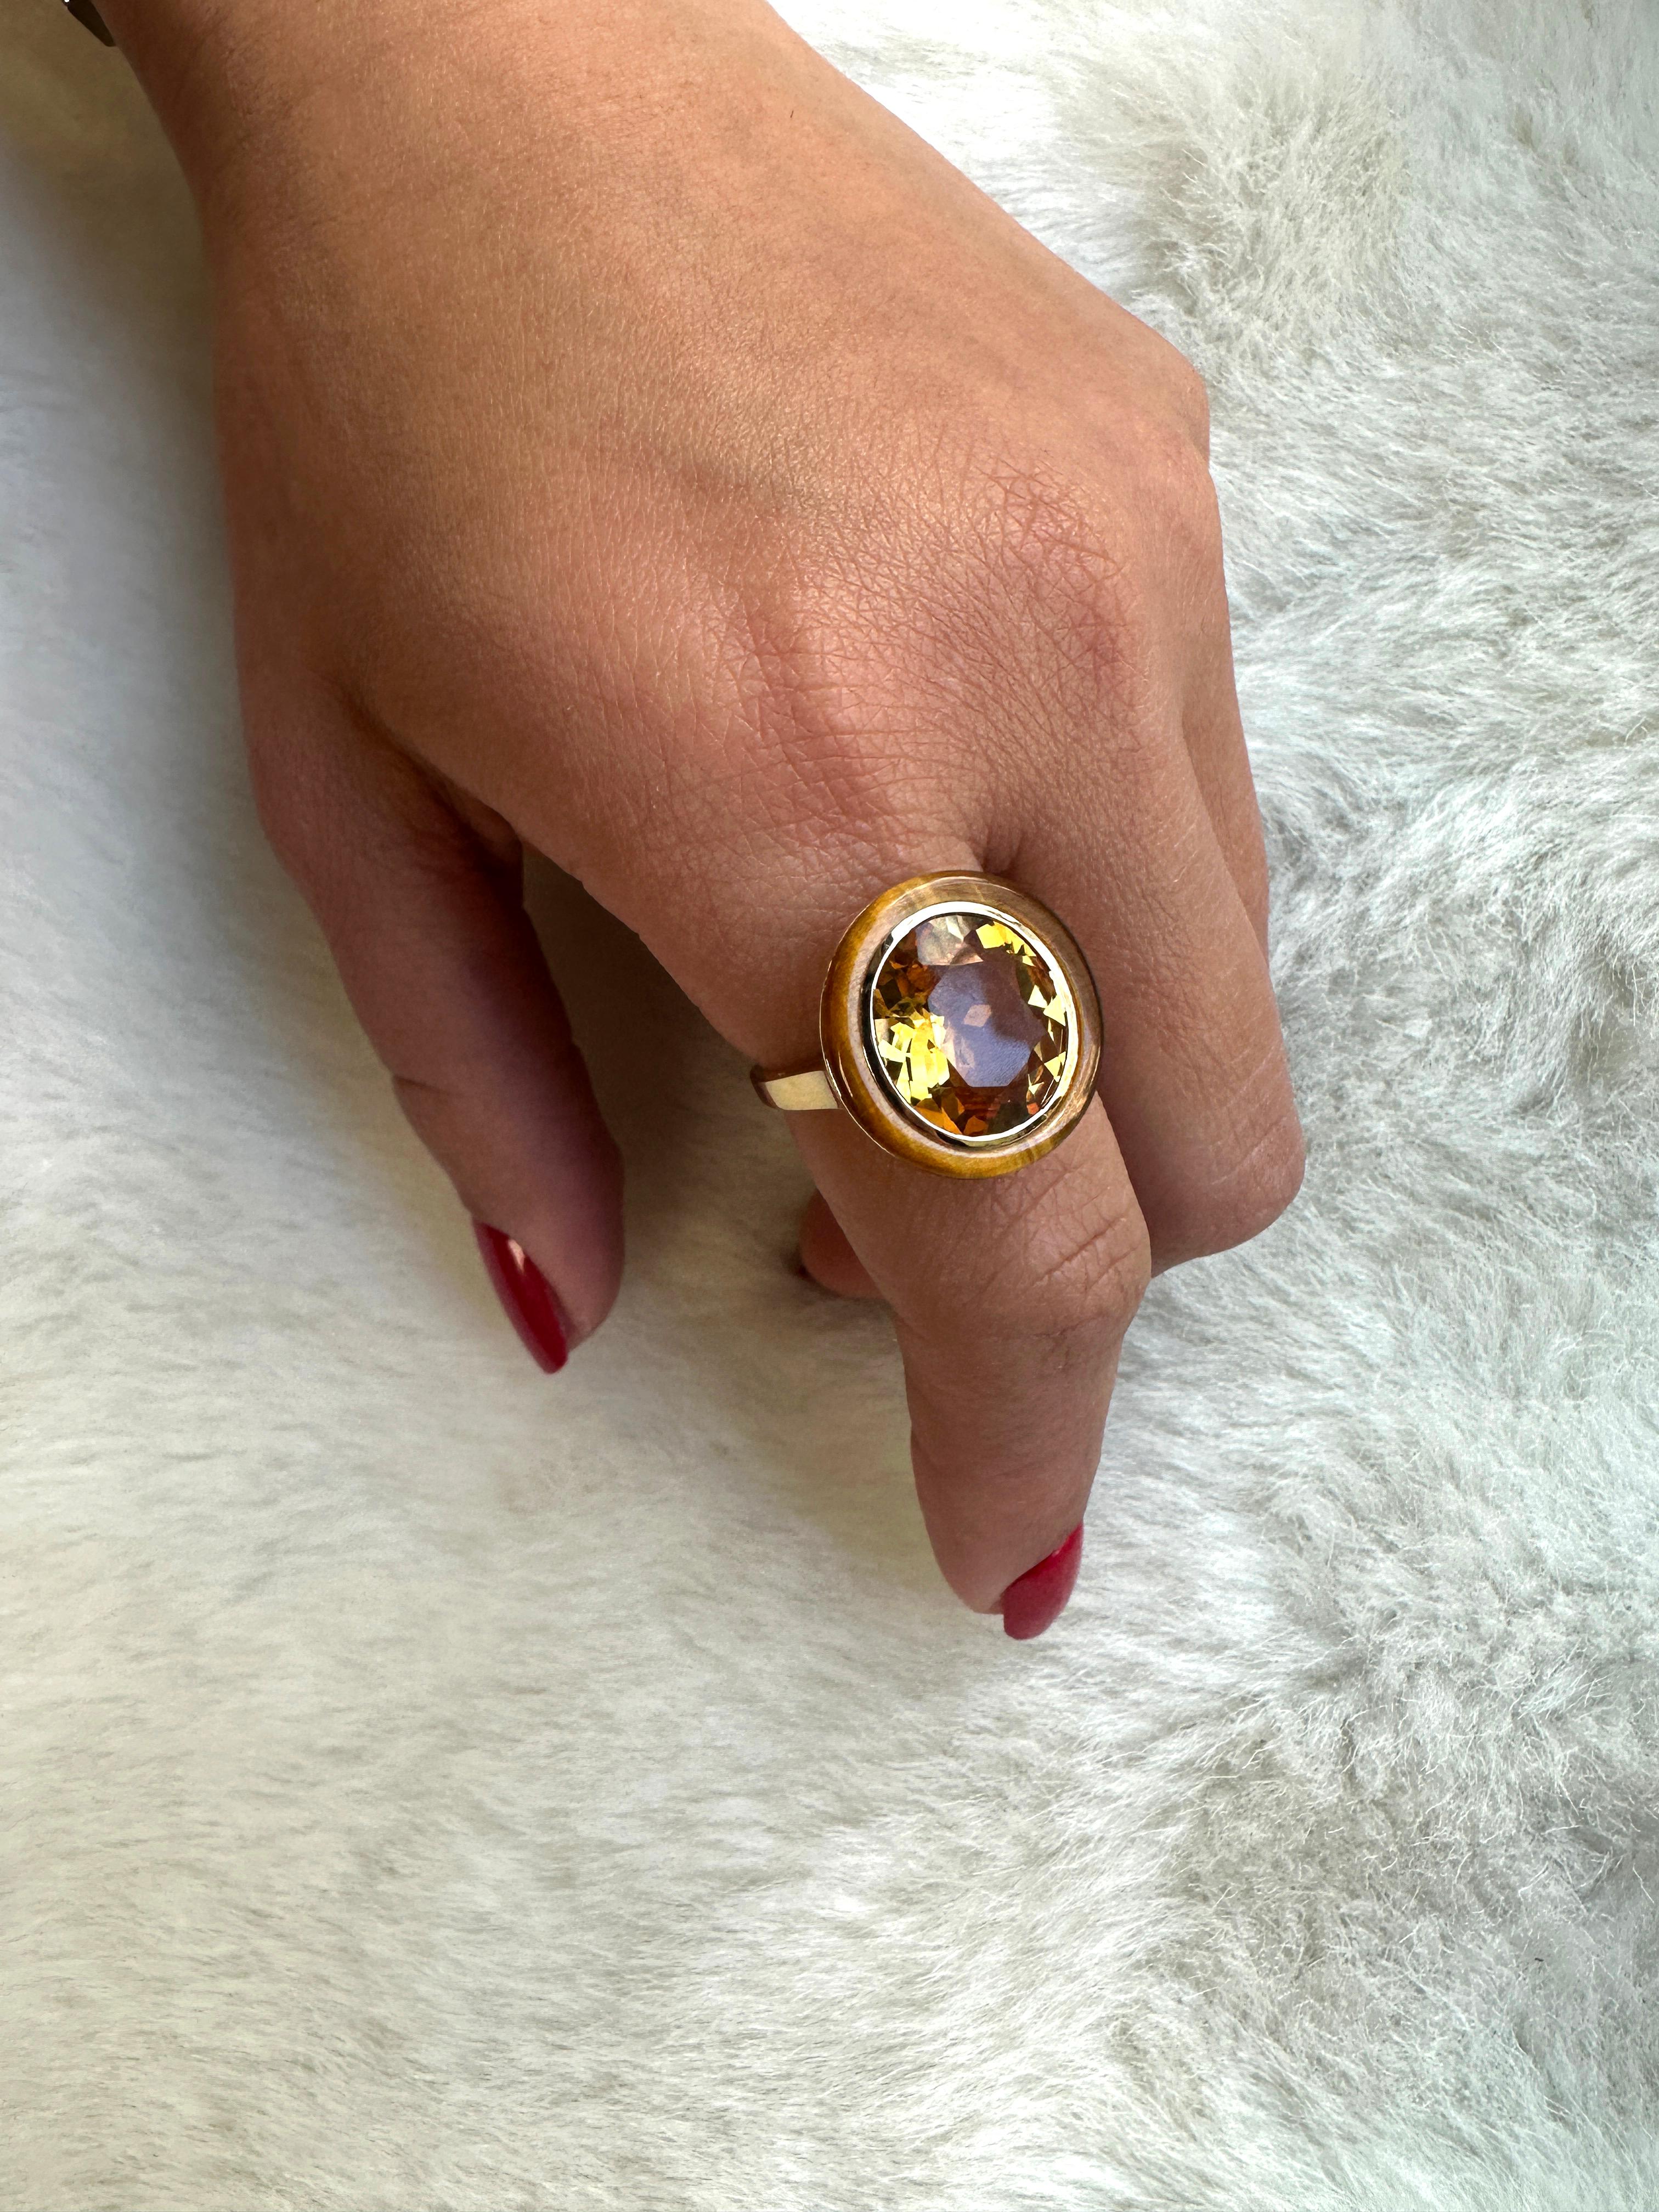 This Orange Citrine & Tiger's Eye Oval Ring in 18K Yellow Gold from the 'Melange' Collection is a stunning piece of jewelry that is perfect for those who love unique and bold designs. The ring features an oval-shaped orange citrine stone and tiger's